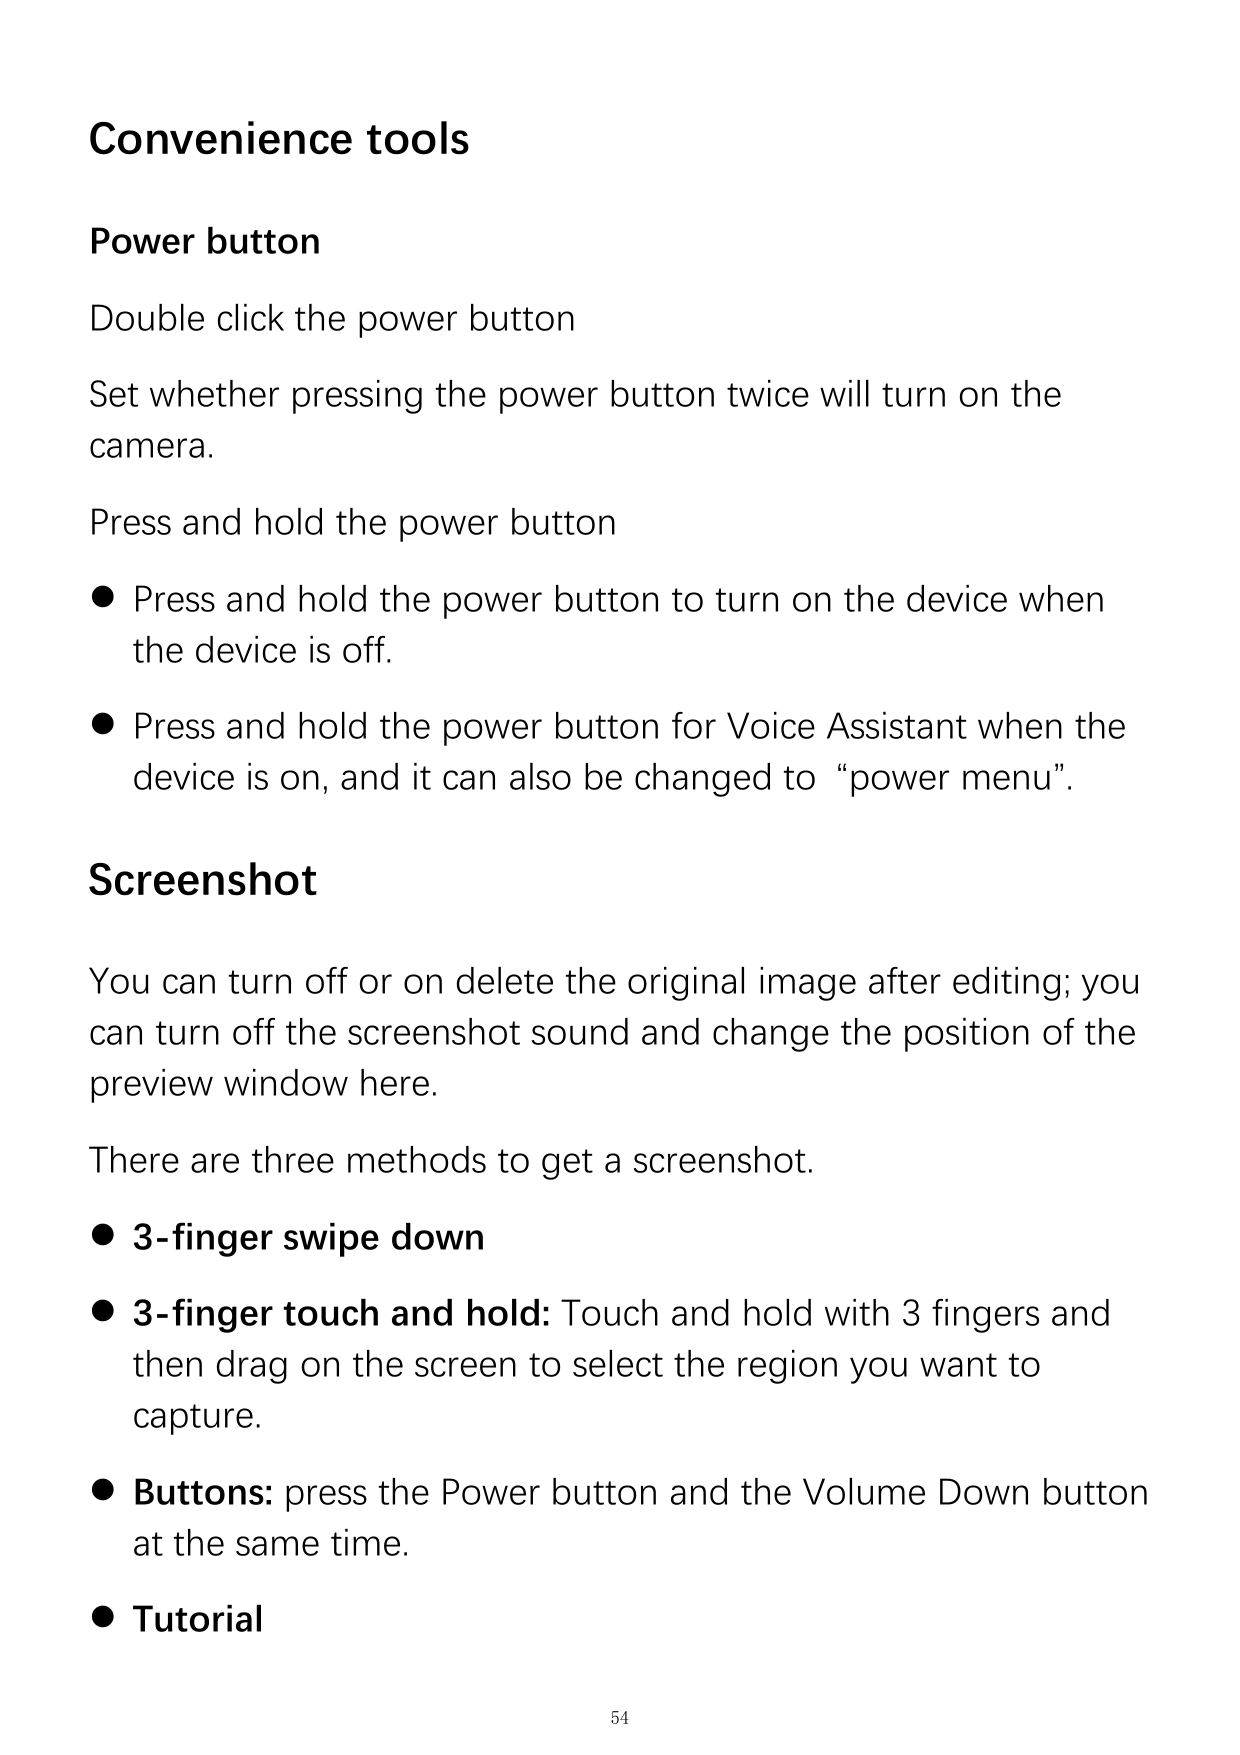 Convenience toolsPower buttonDouble click the power buttonSet whether pressing the power button twice will turn on thecamera.Pre